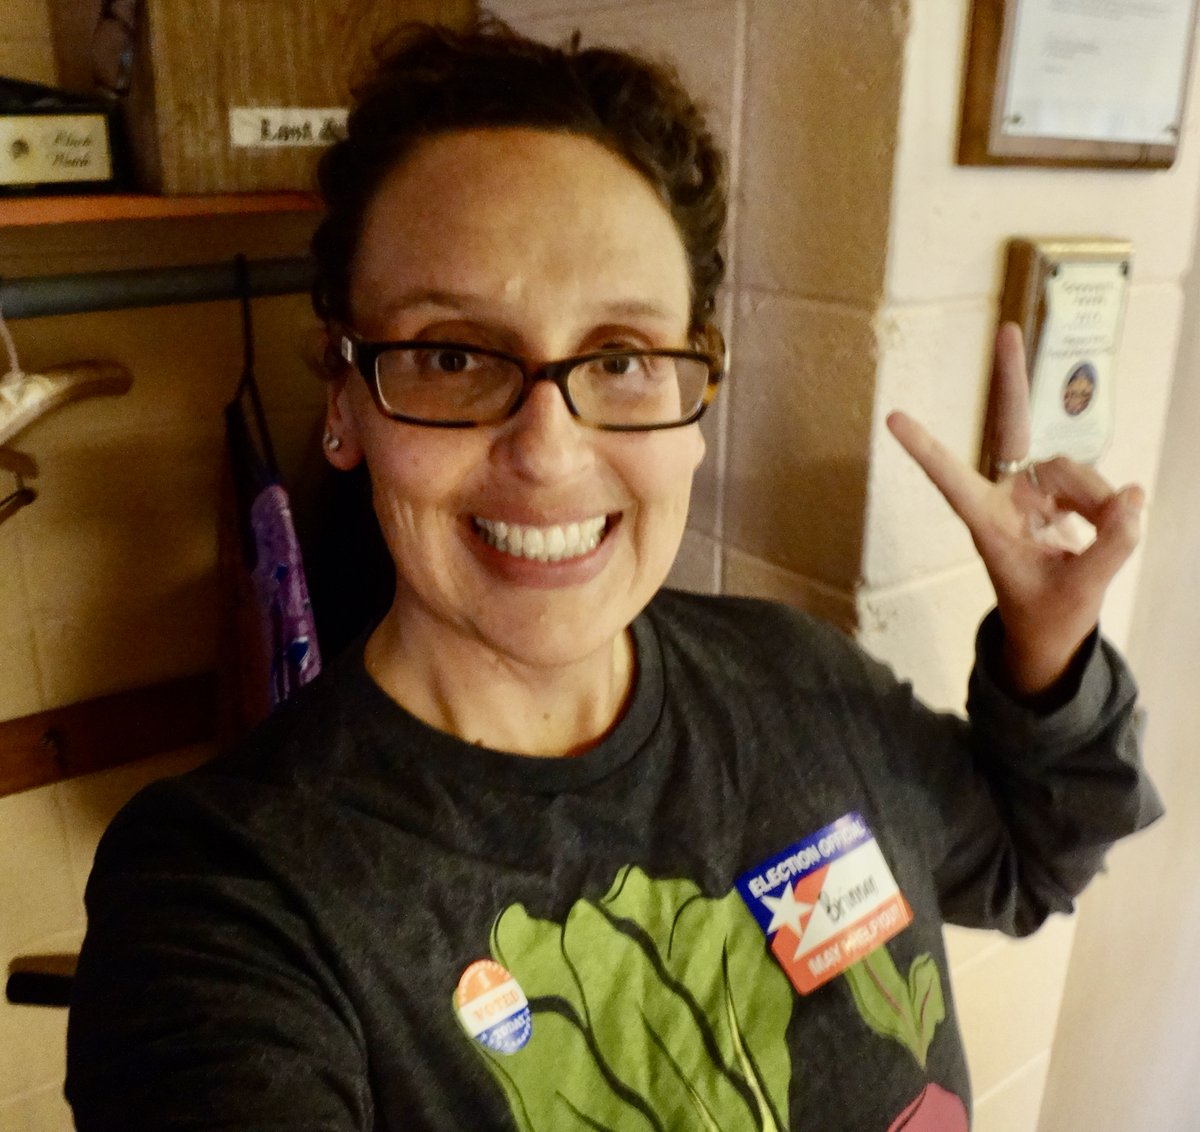 Voted yesterday AND worked at my polling place for 9.75 hours! #democracy #Vote #VotingRights